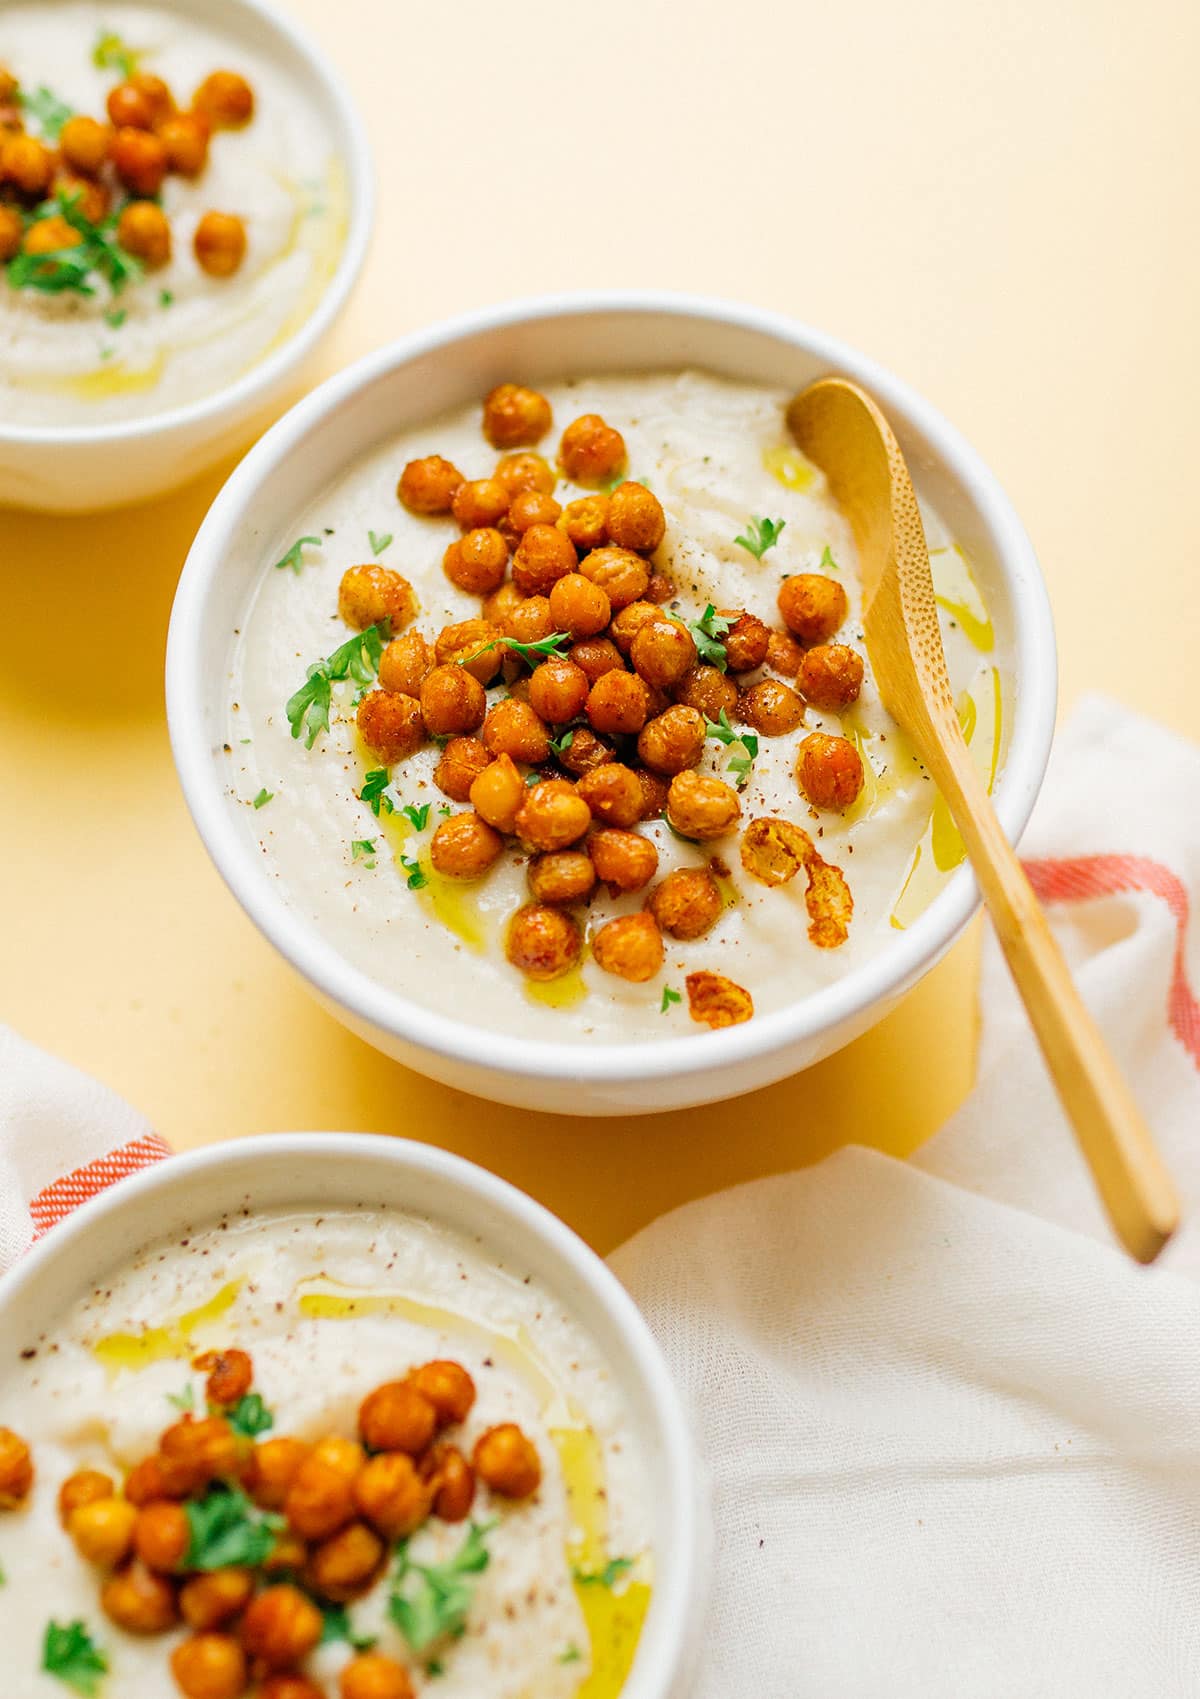 Cauliflower soup with chickpeas in 3 bowls.